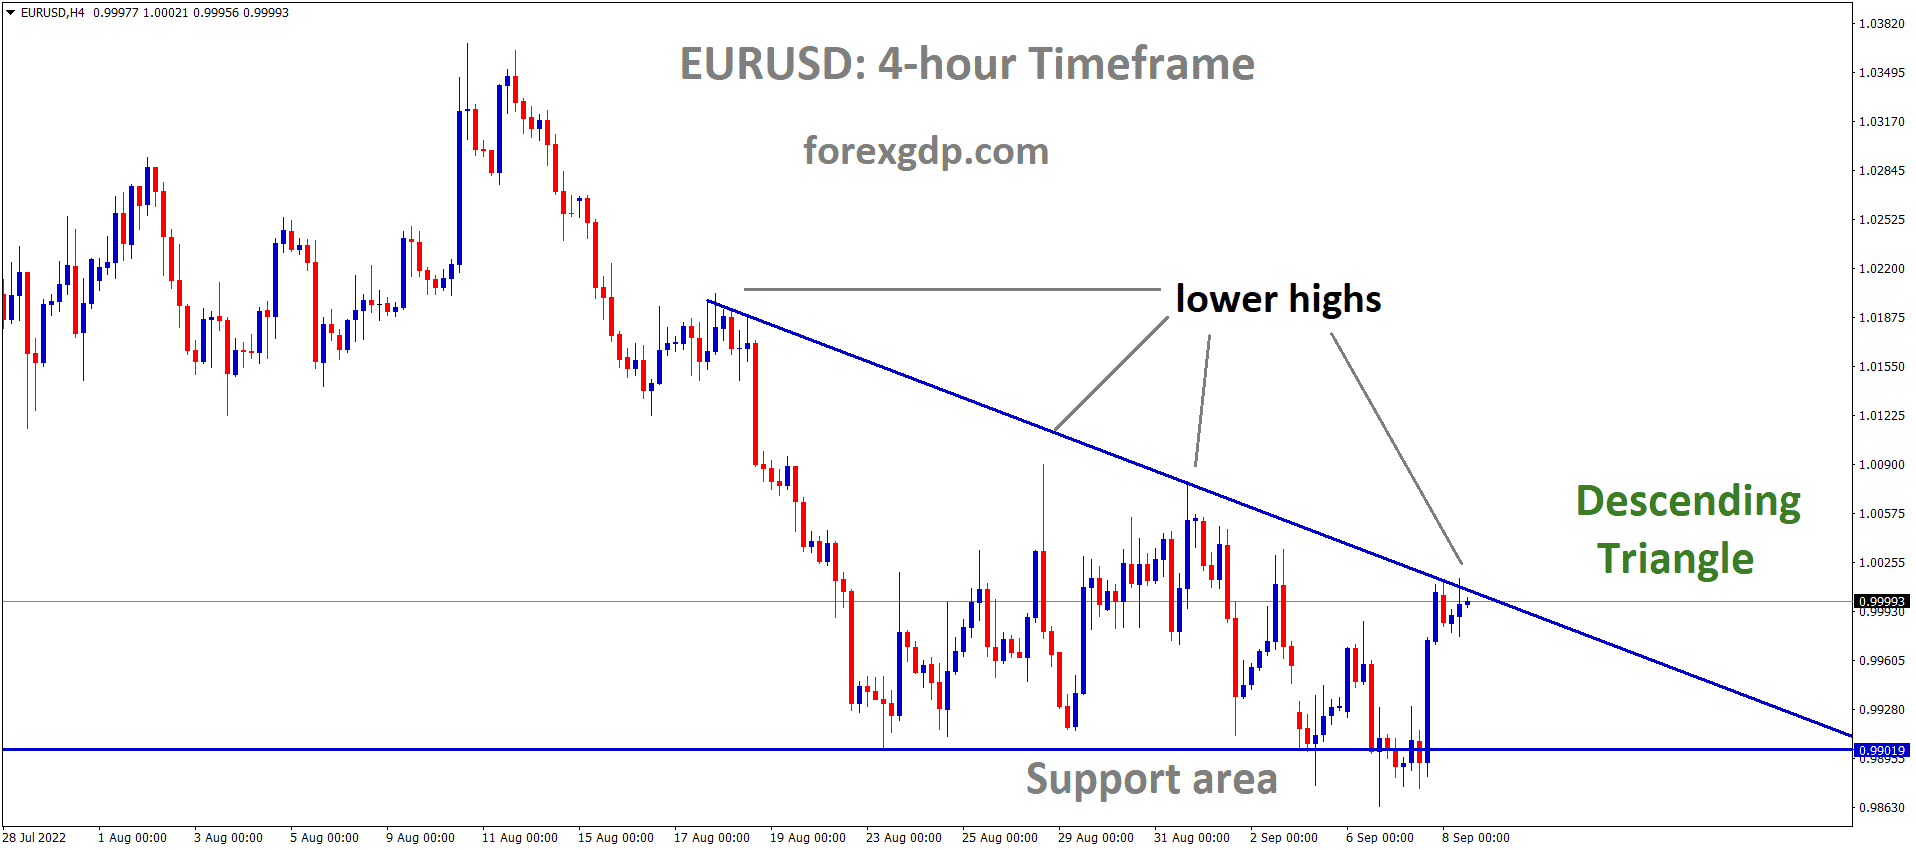 EURUSD is moving in the Descending triangle pattern and the market has reached the Lower high area of the pattern.